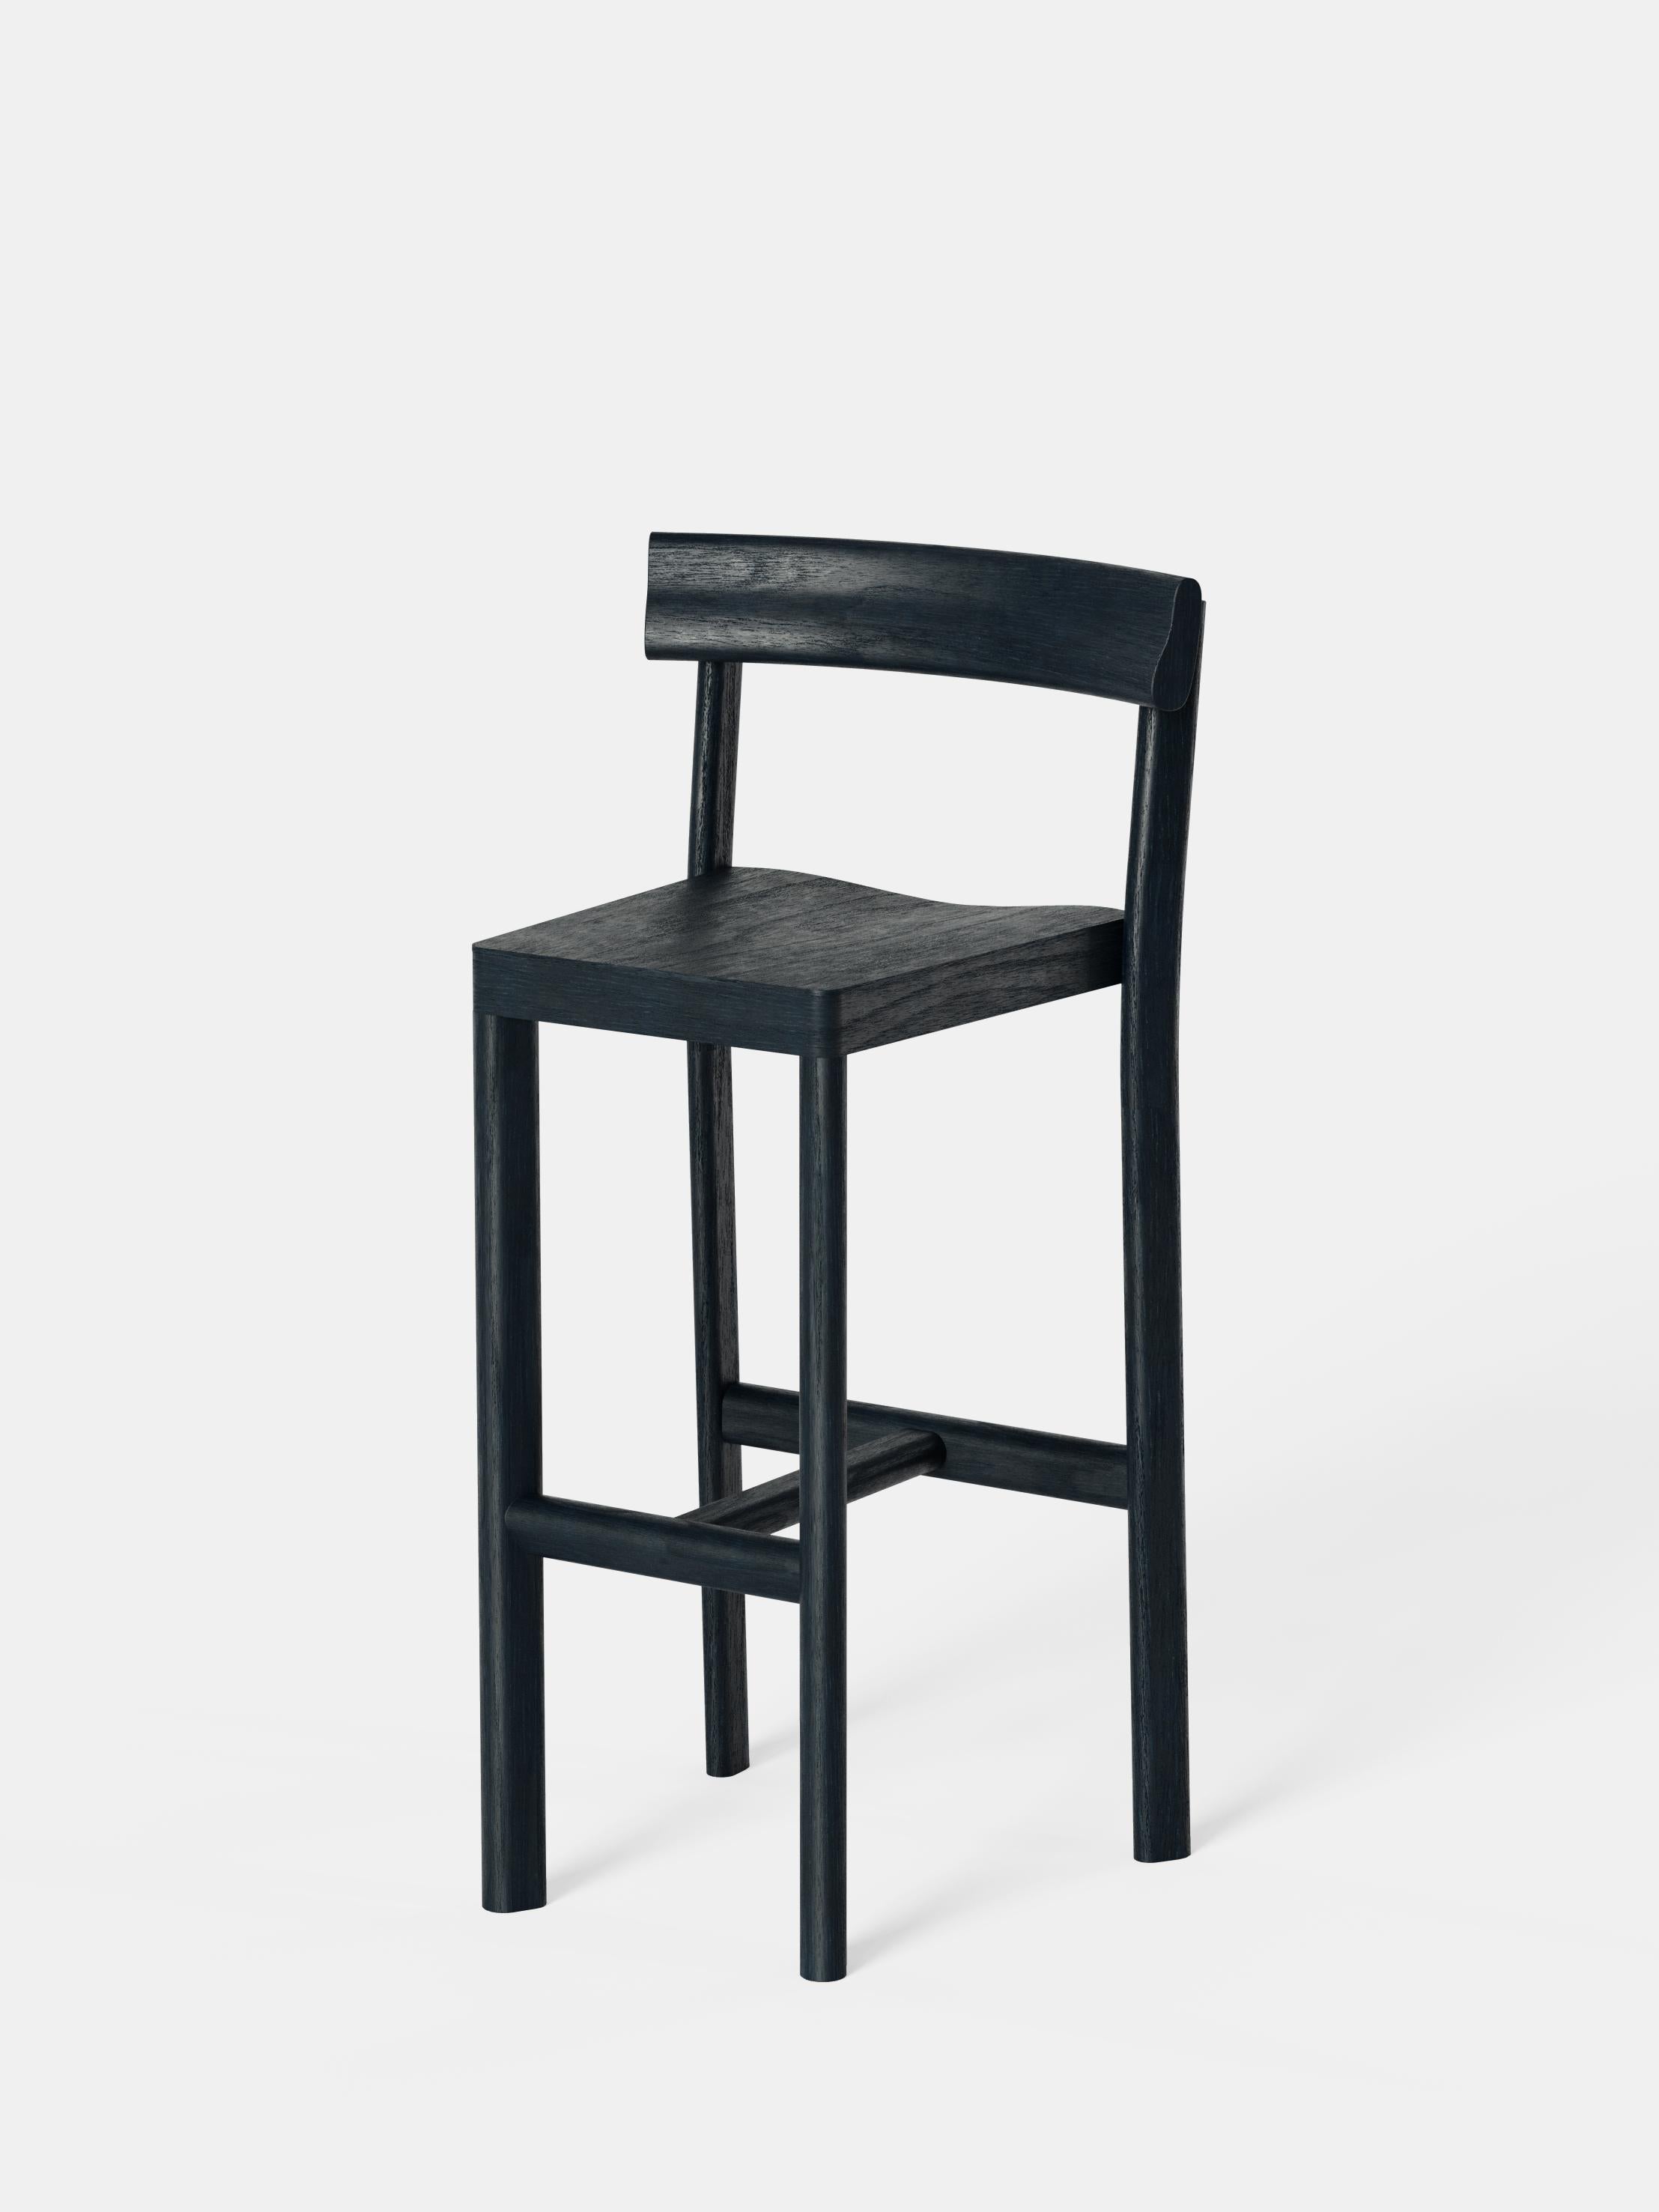 Set of 6 Galta 75 Black Oak Counter Chairs by Kann Design
Dimensions: D 50 x W 43 x H 101.5 cm.
Materials: Black lacquered oak.
Available in other colors.

The Galta counter chair is the big sister of the classic Galta chair. The base stretches and